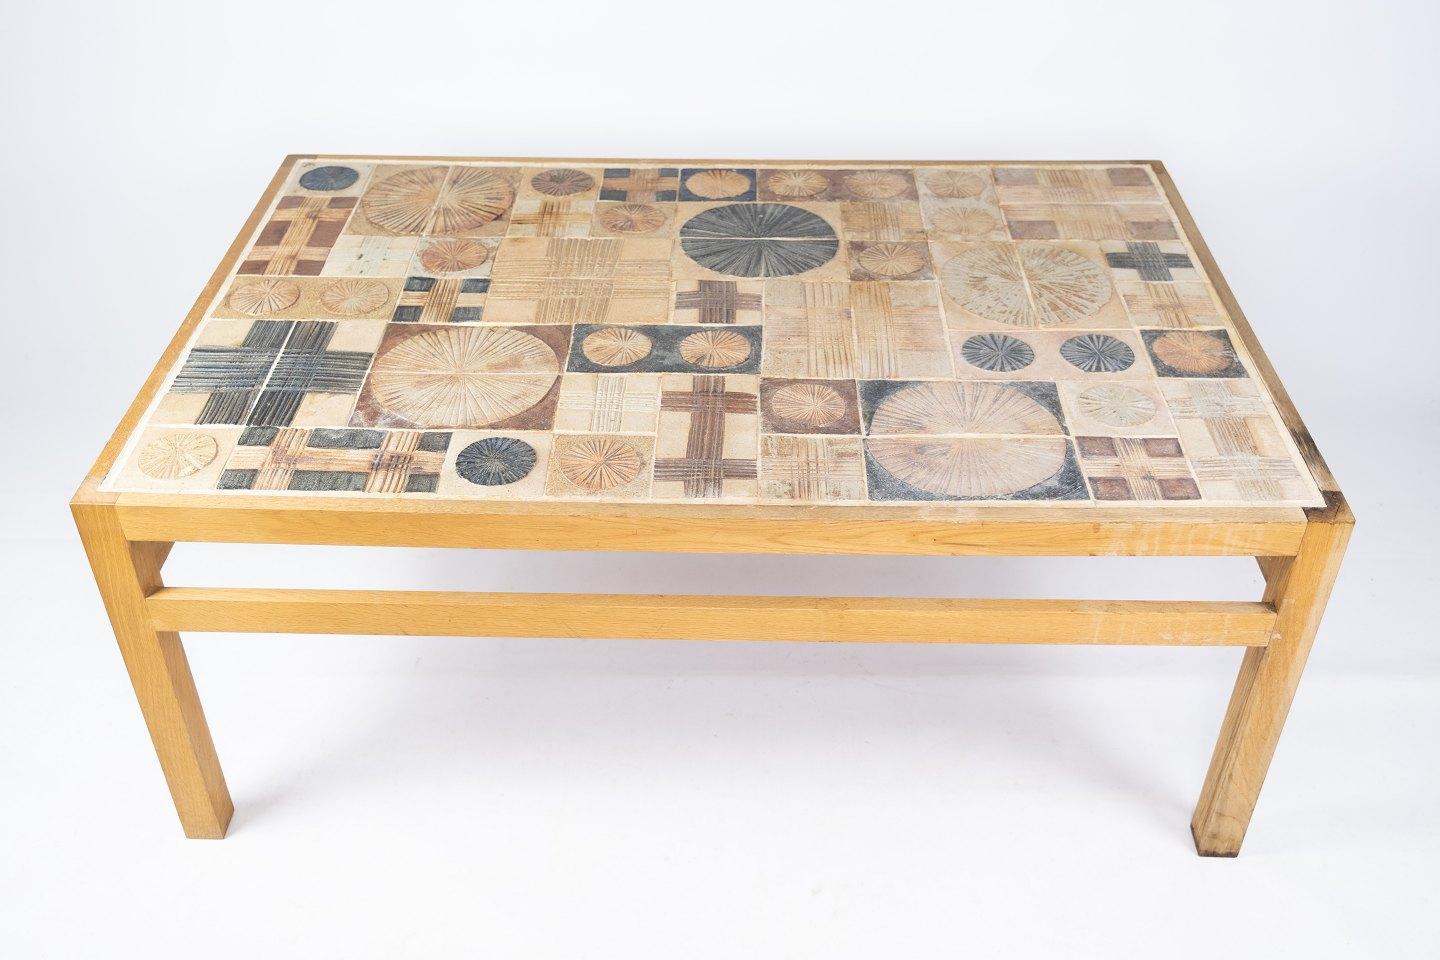 Scandinavian Modern Coffee Table in Oak and with Different Tiles, Designed by Tue Poulsen, 1970s